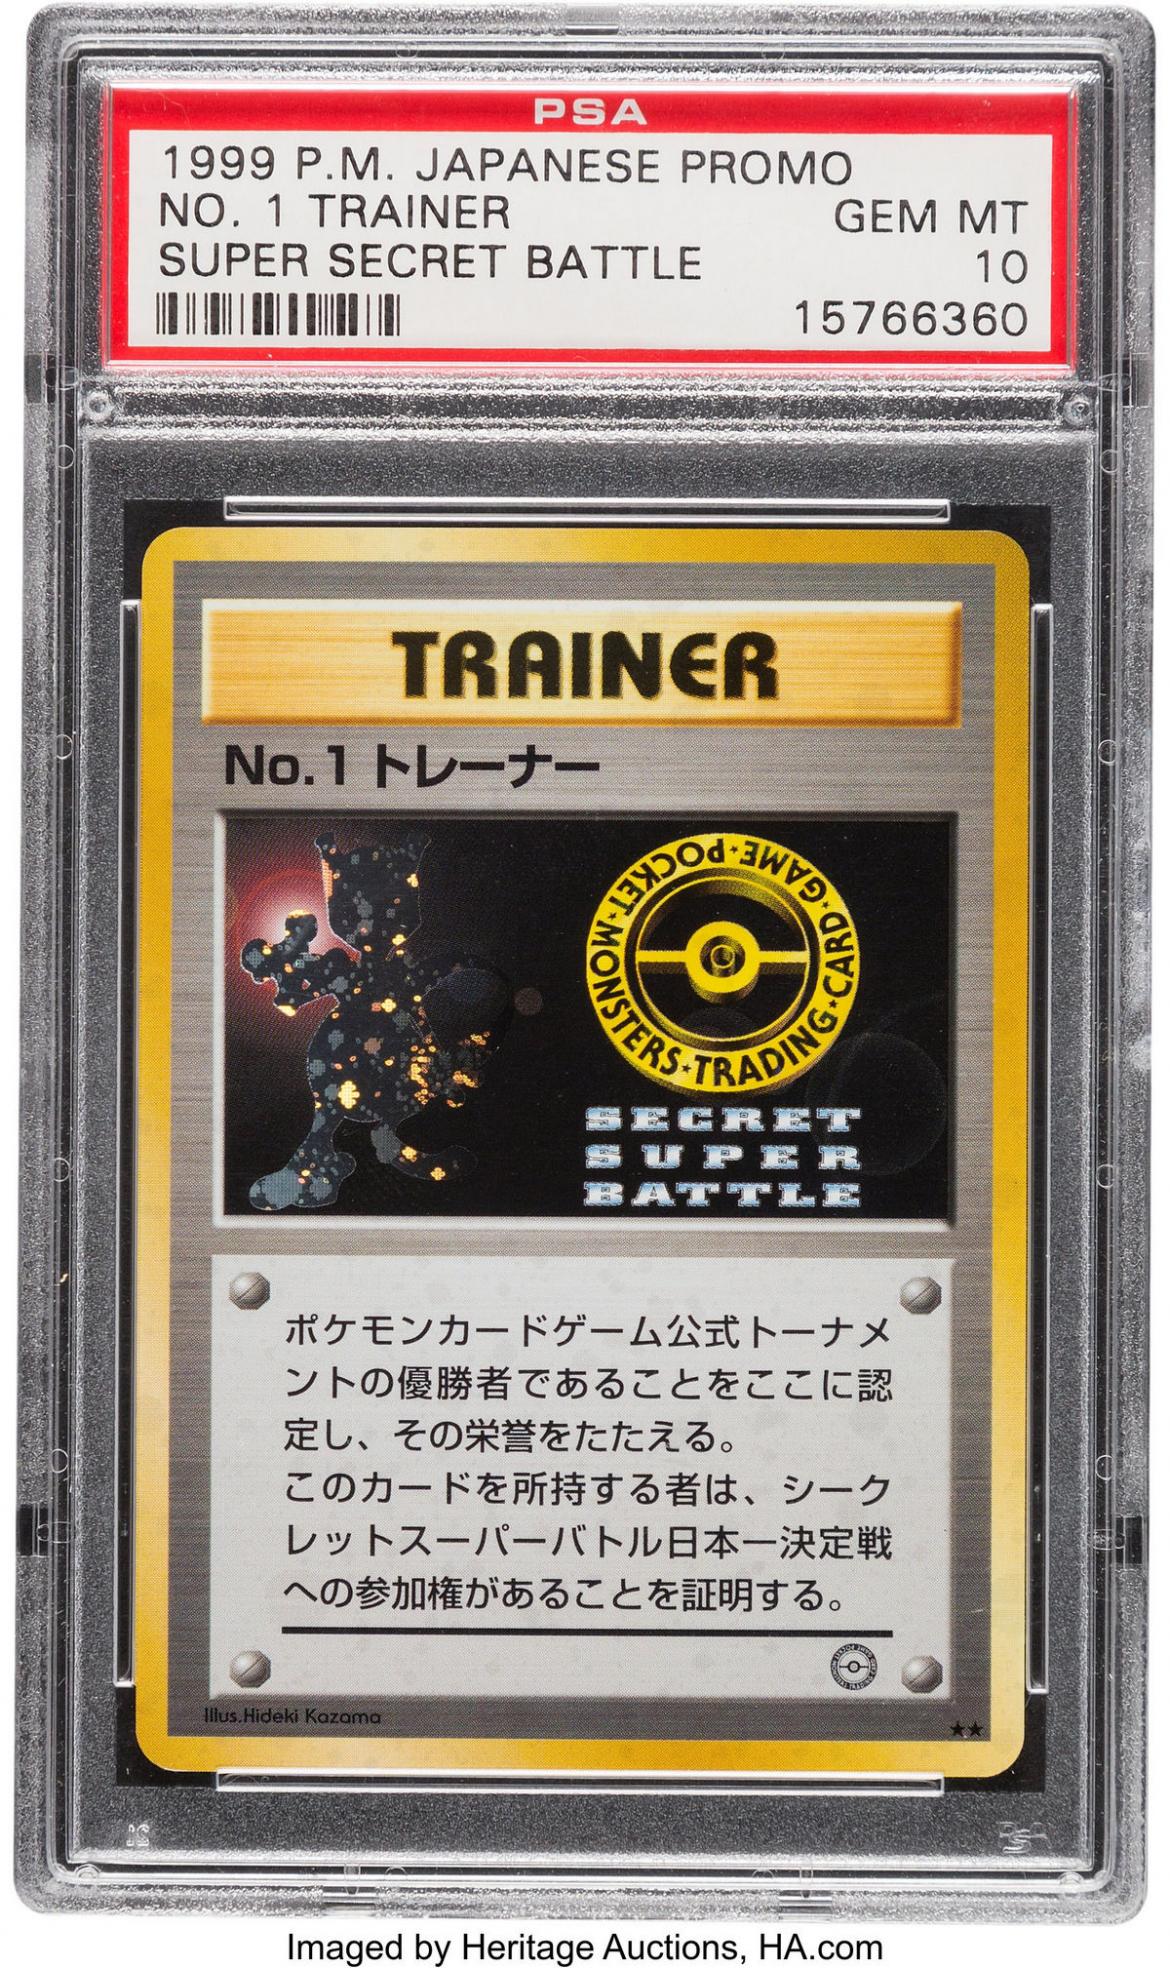 This extremely rare Pokémon Trainer card is expected to sell for $100,000 in auction ...